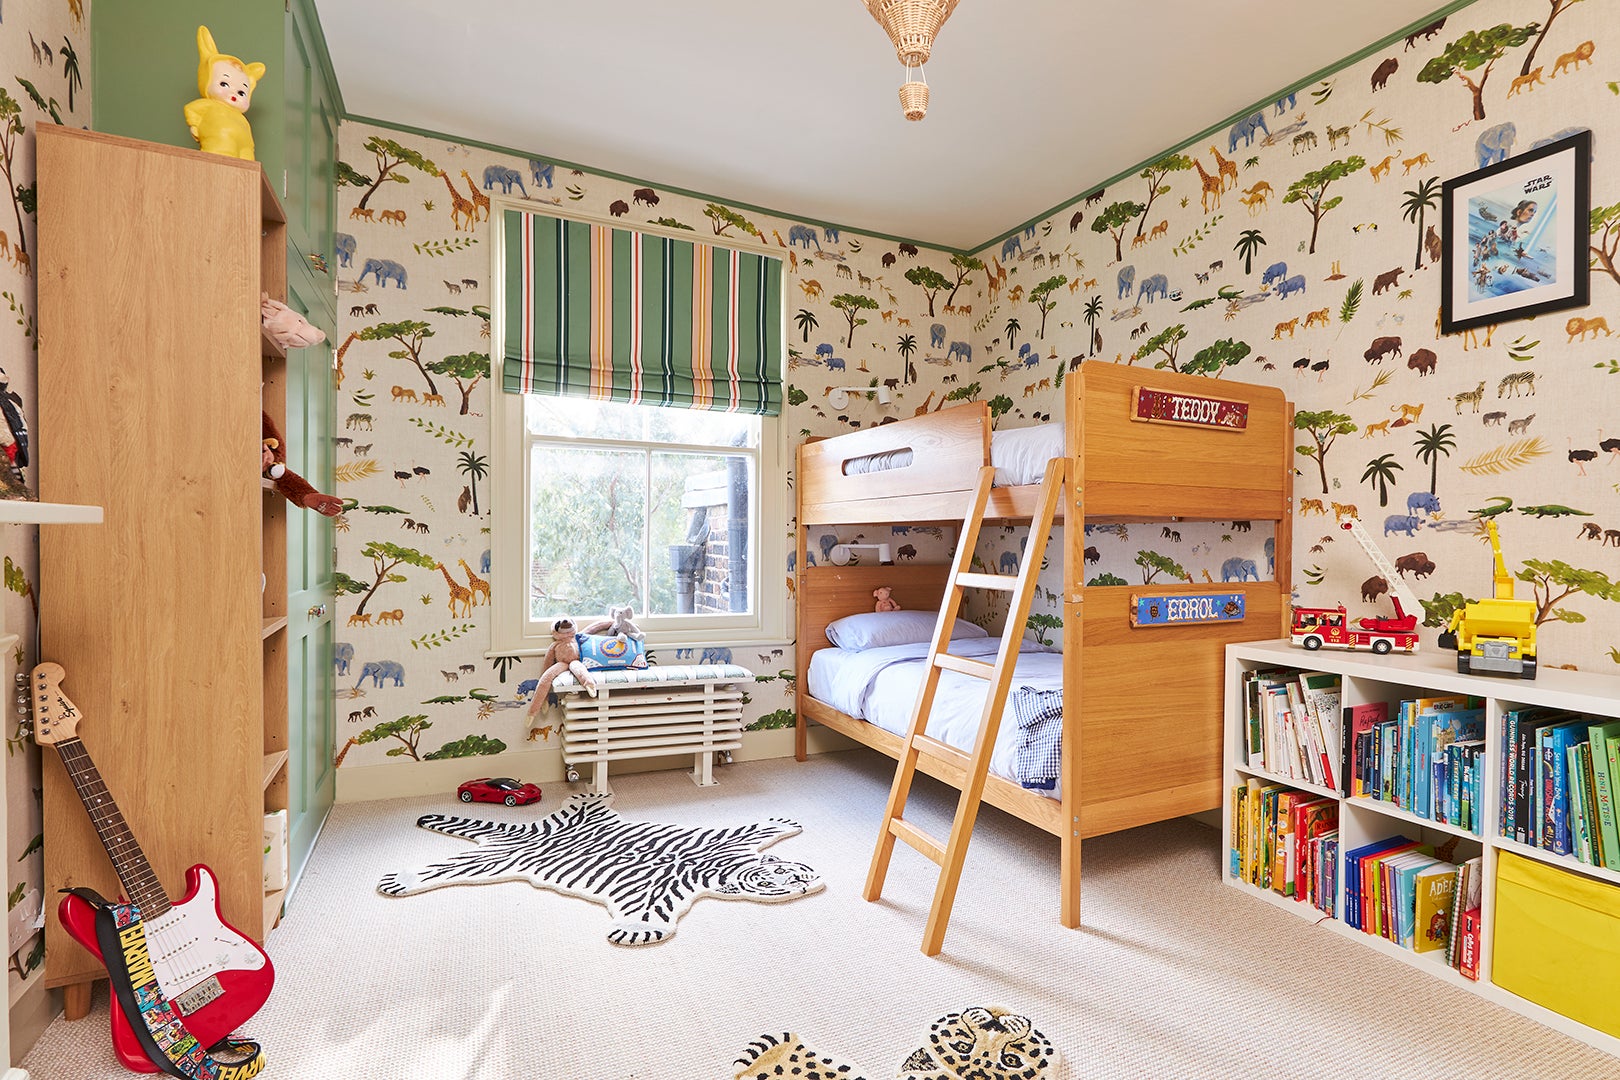 Pony Palace, Safari Adventure—Each of These 4 Kids’ Rooms Is Its Own Little World